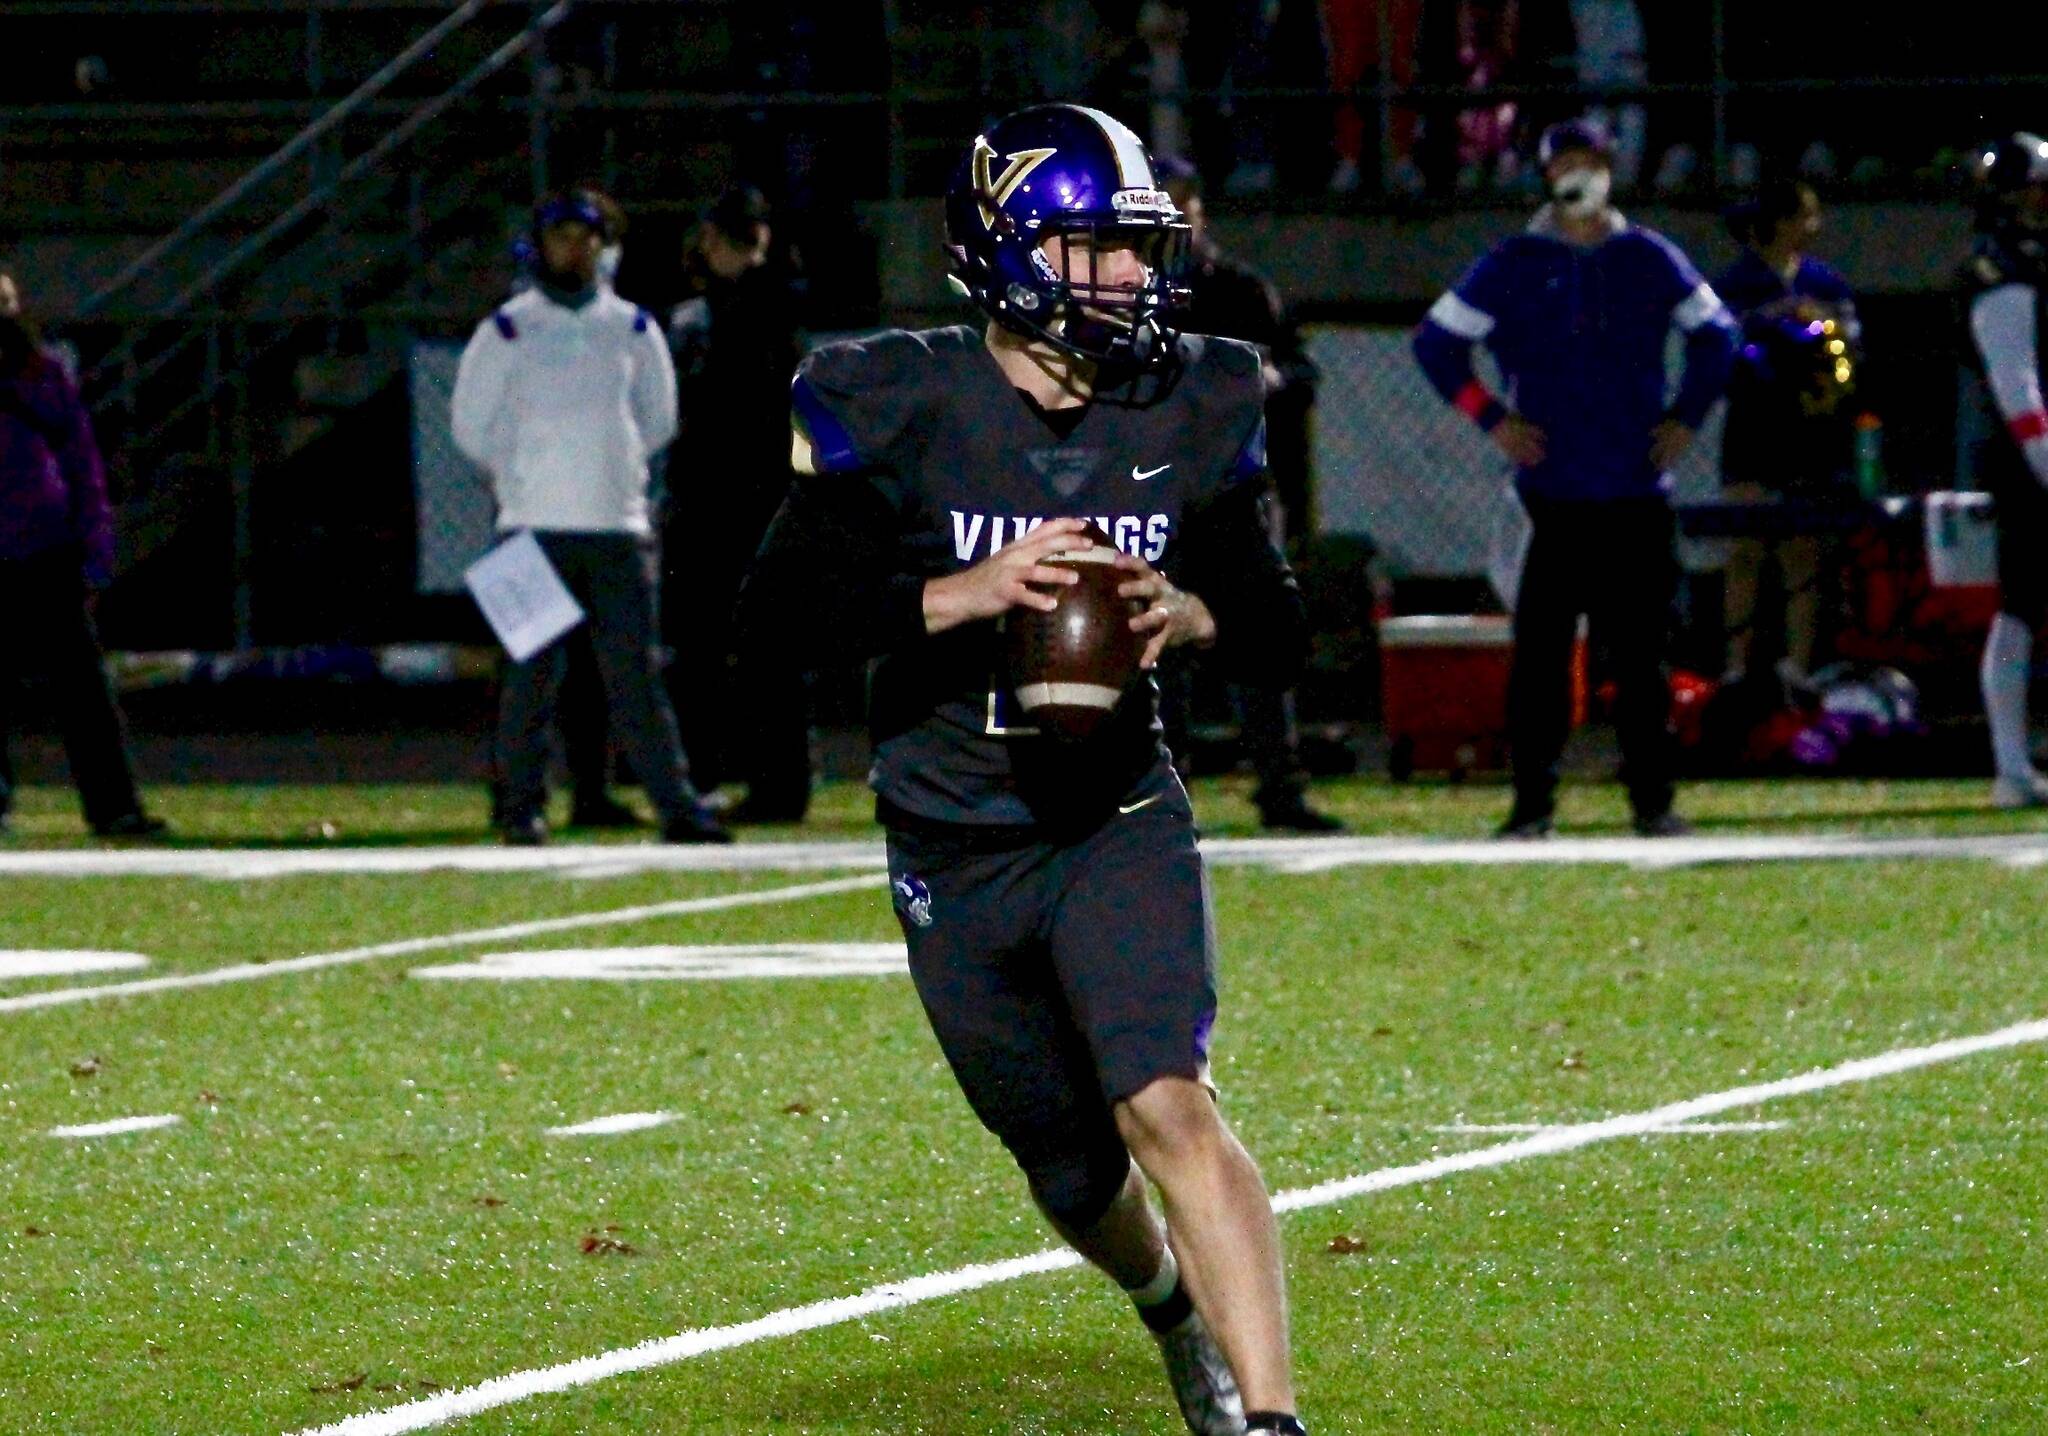 Colton Bower’s 299-yard, six touchdown performance on Friday night helped him break the North Kitsap record for passing yards in a season. (Mark Krulish/Kitsap News Group)